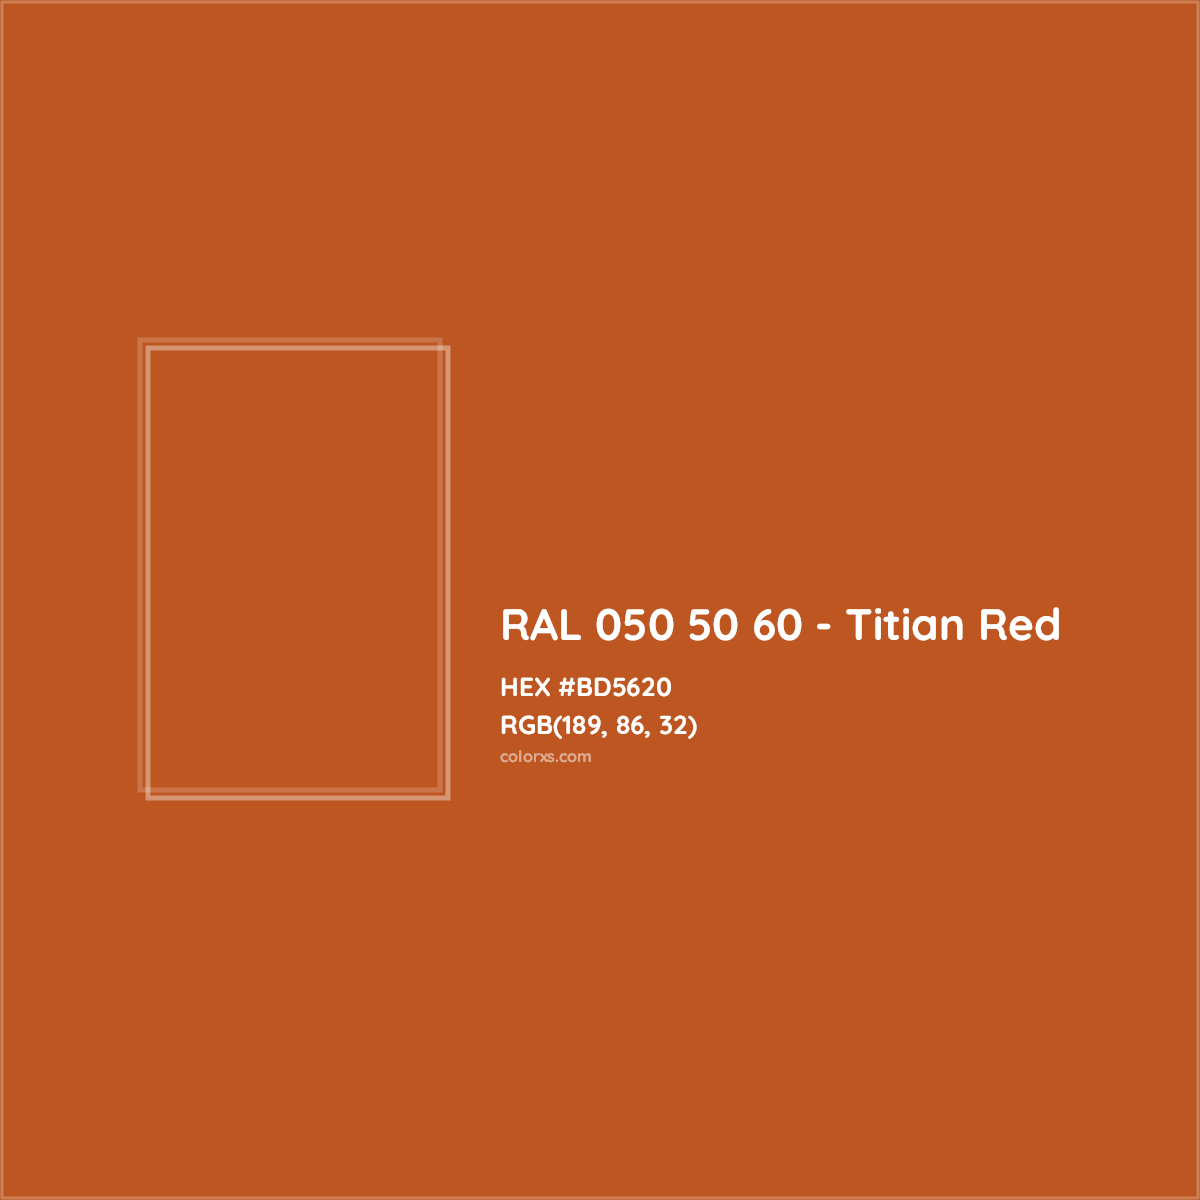 HEX #BD5620 RAL 050 50 60 - Titian Red CMS RAL Design - Color Code